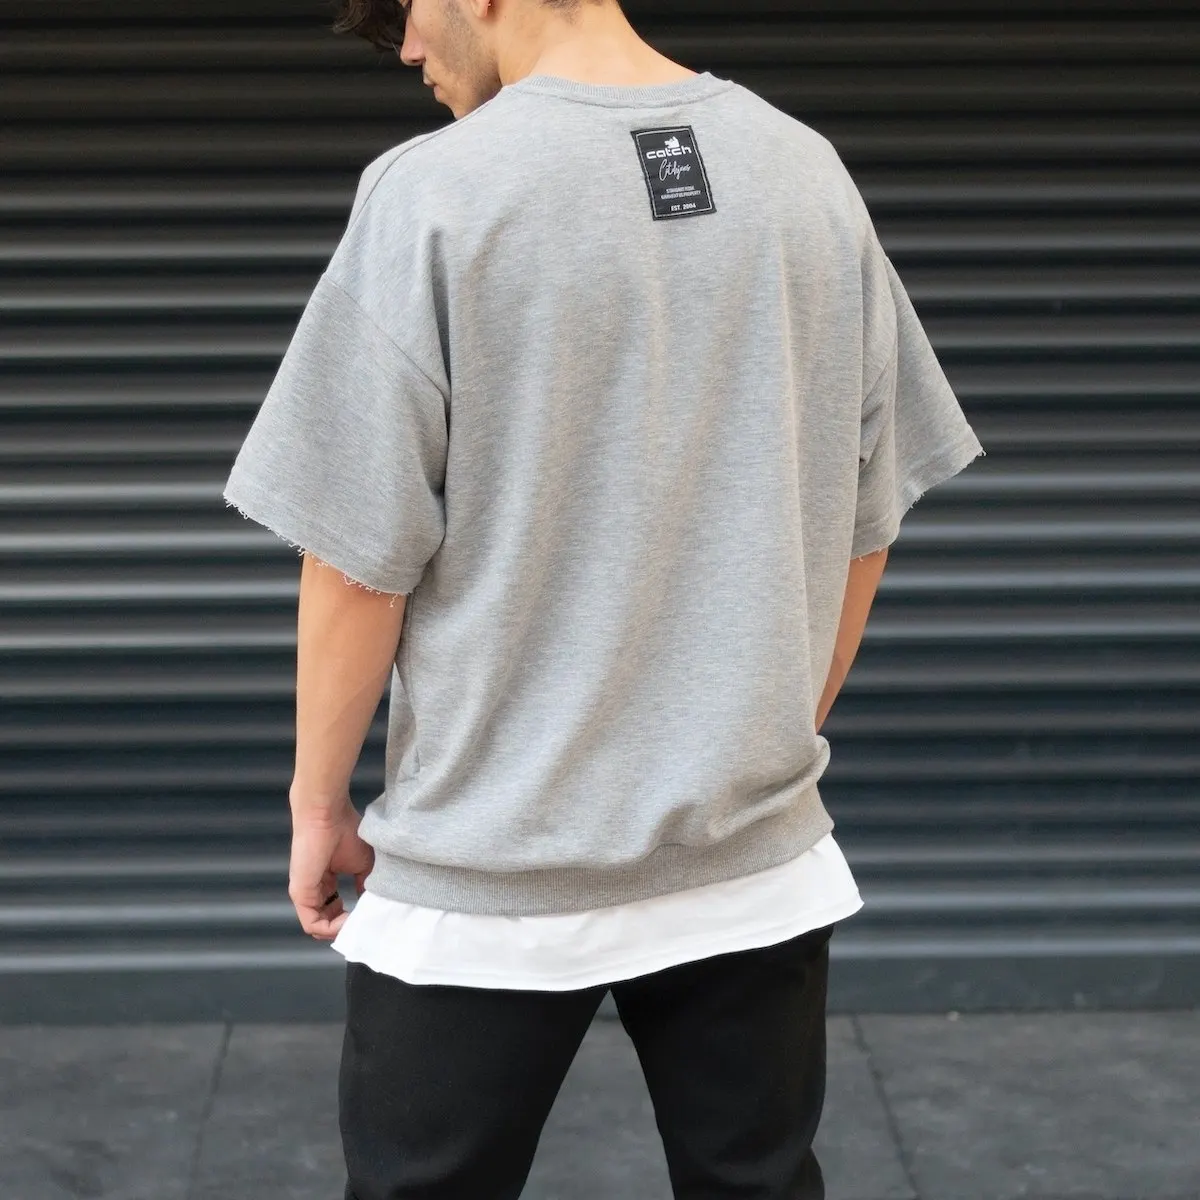 Oversize double tailed t-shirt casual 100% cotton men boys man new style best price wholesale